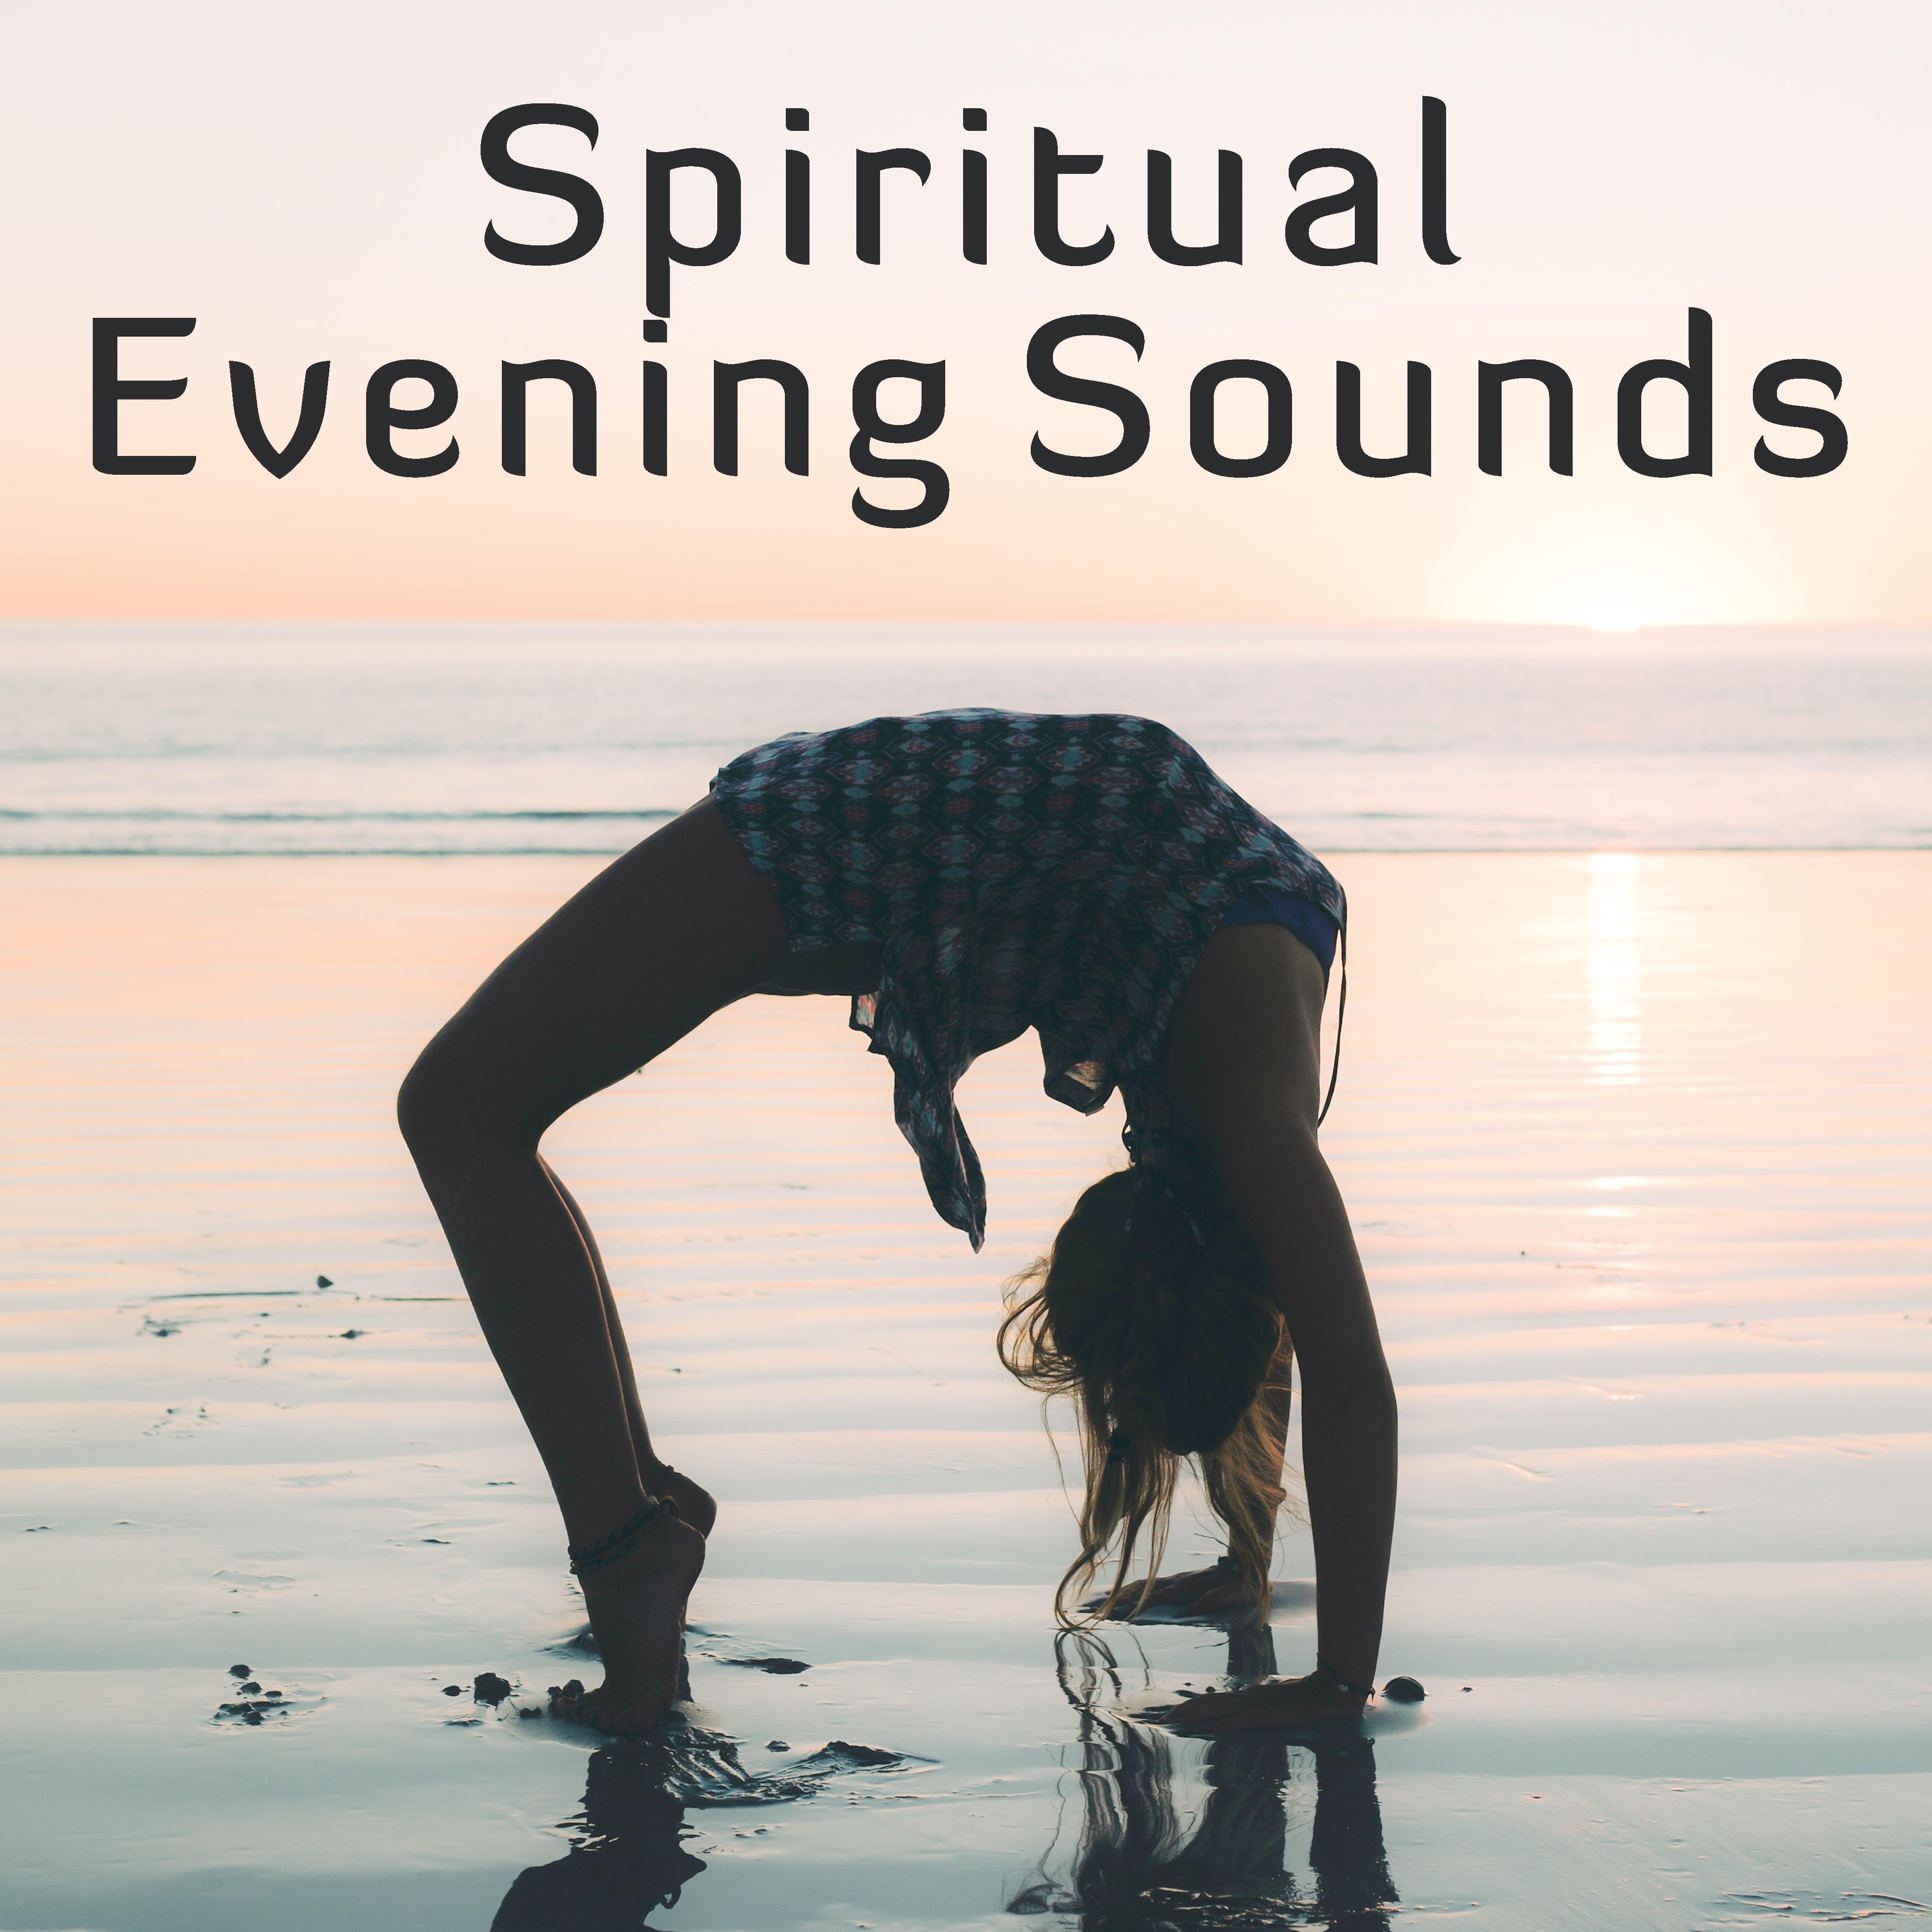 Spiritual Evening Sounds – Late Meditation, Sounds to Relax, Spiritual Journey, Body Rest, Mind Control